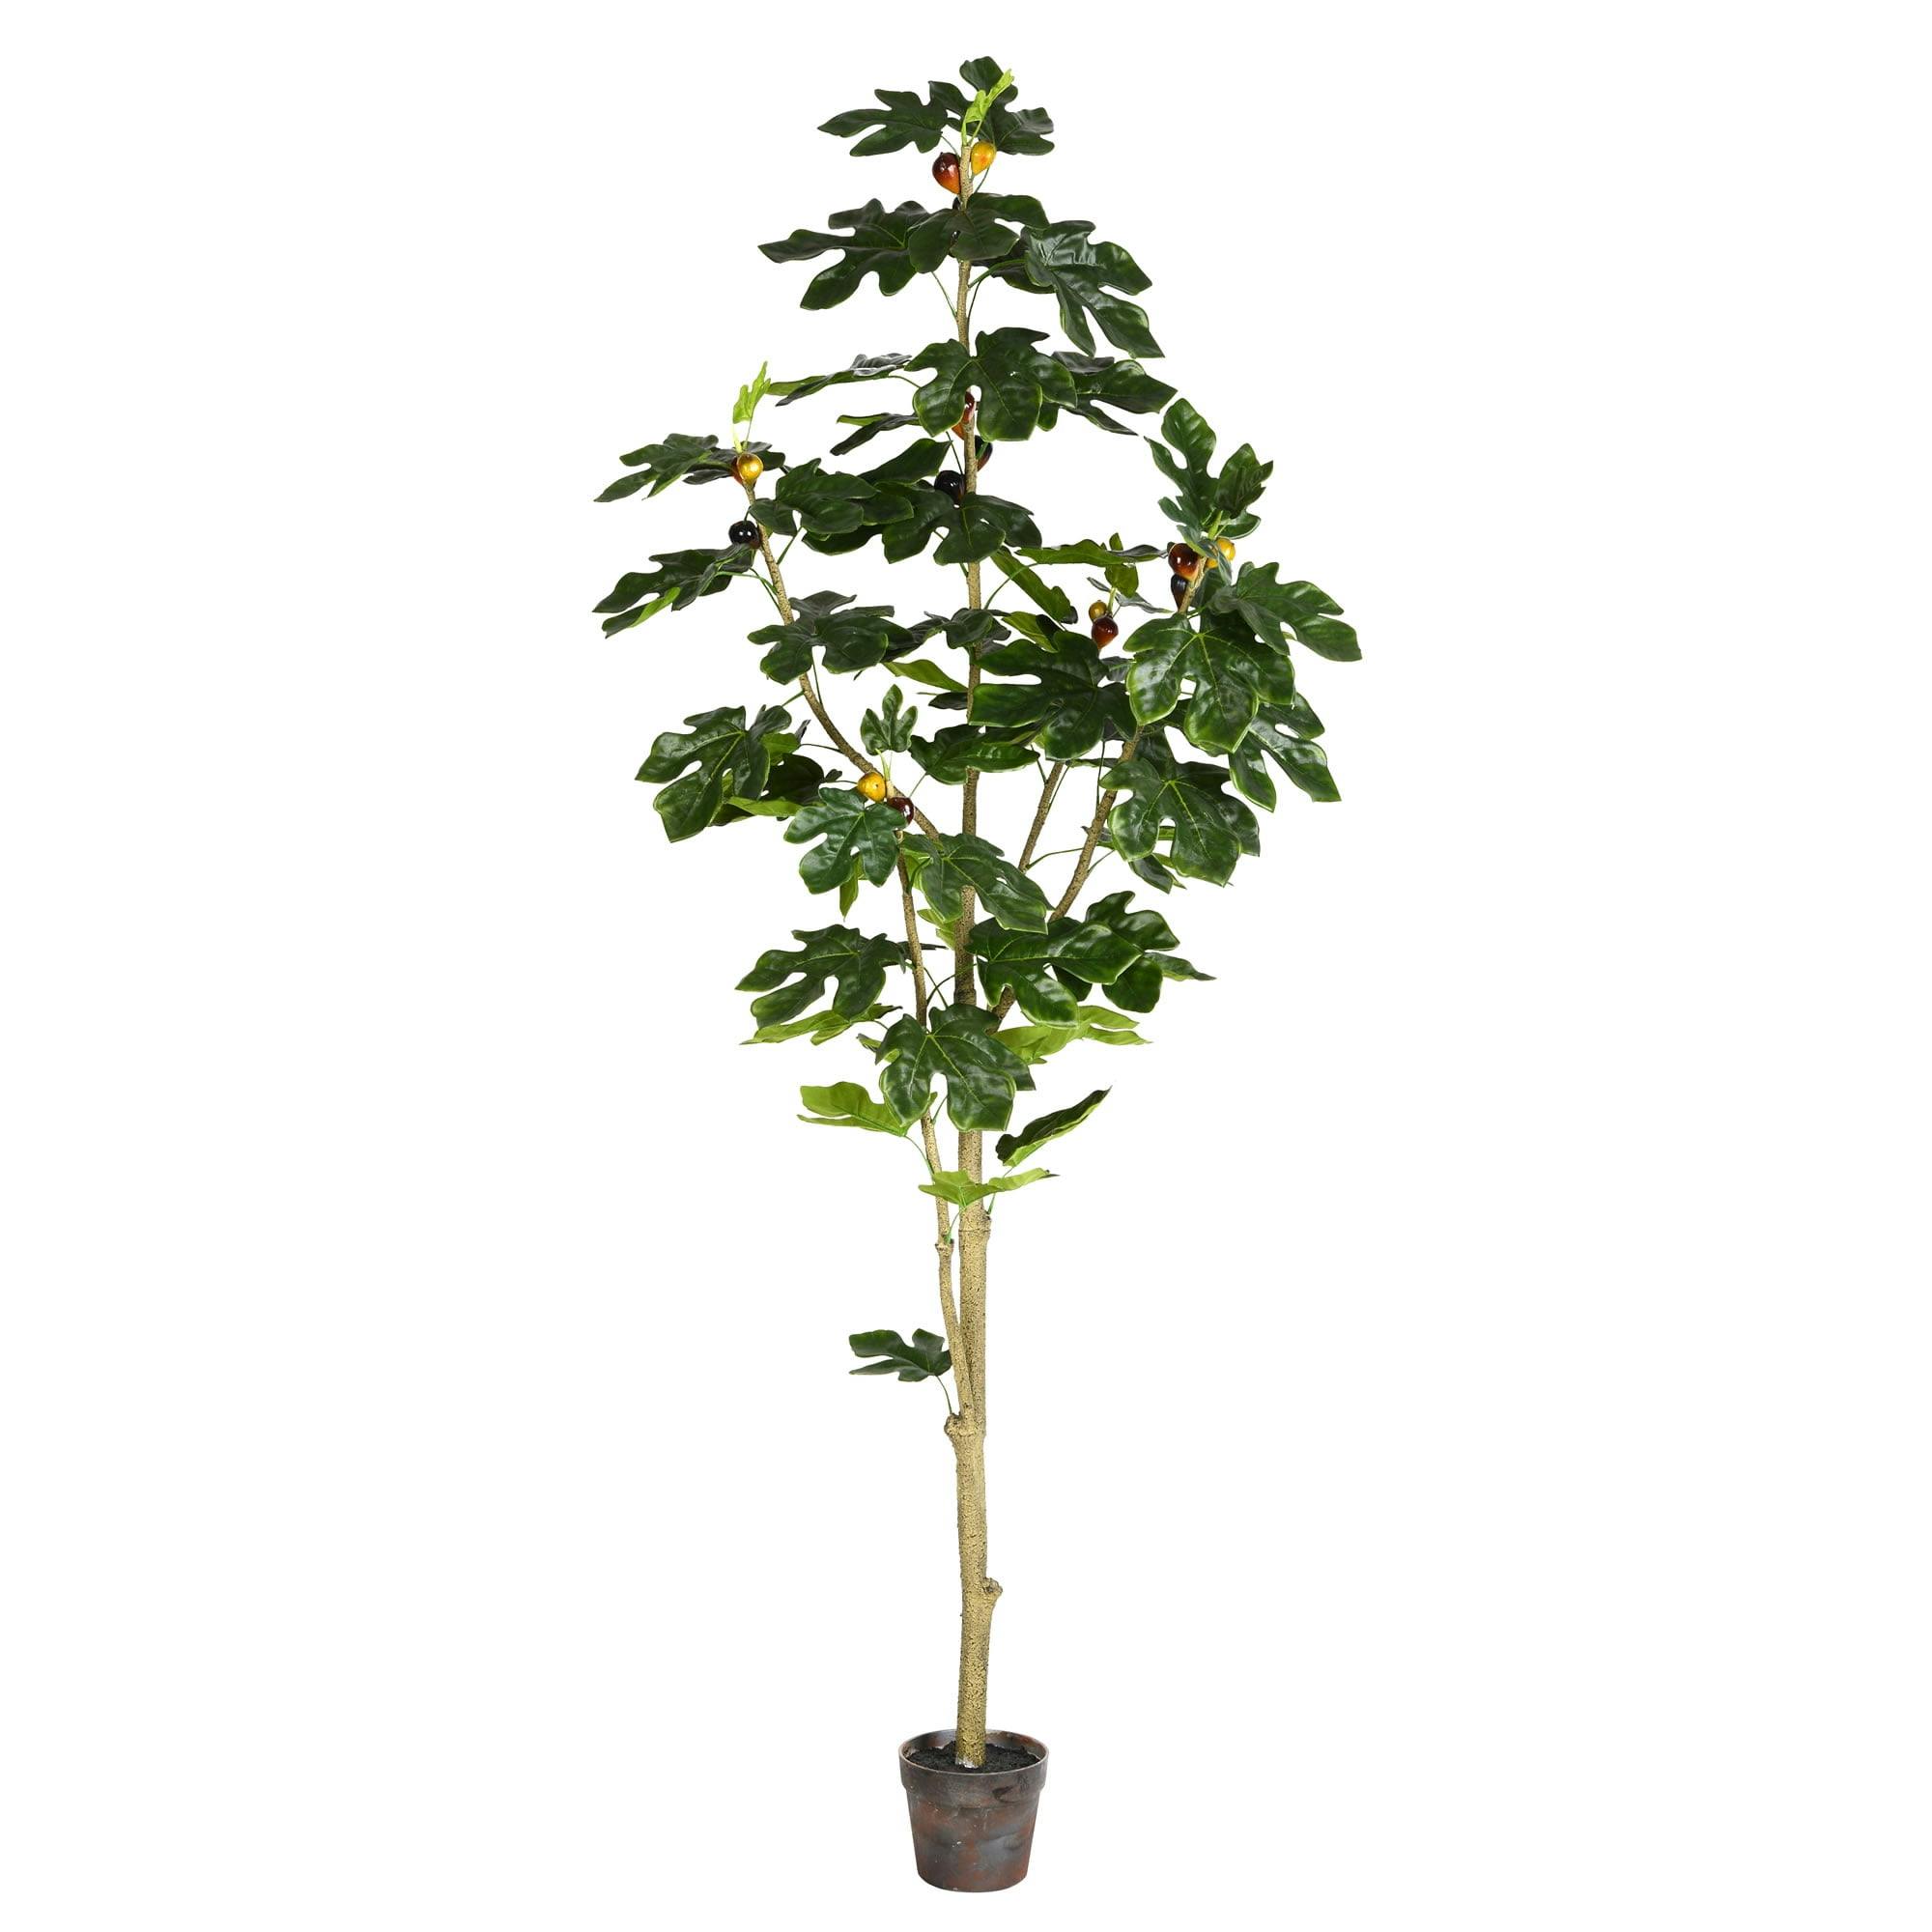 Festive 6' Lush Green Plastic Potted Fig Tree for Outdoor Christmas Decor